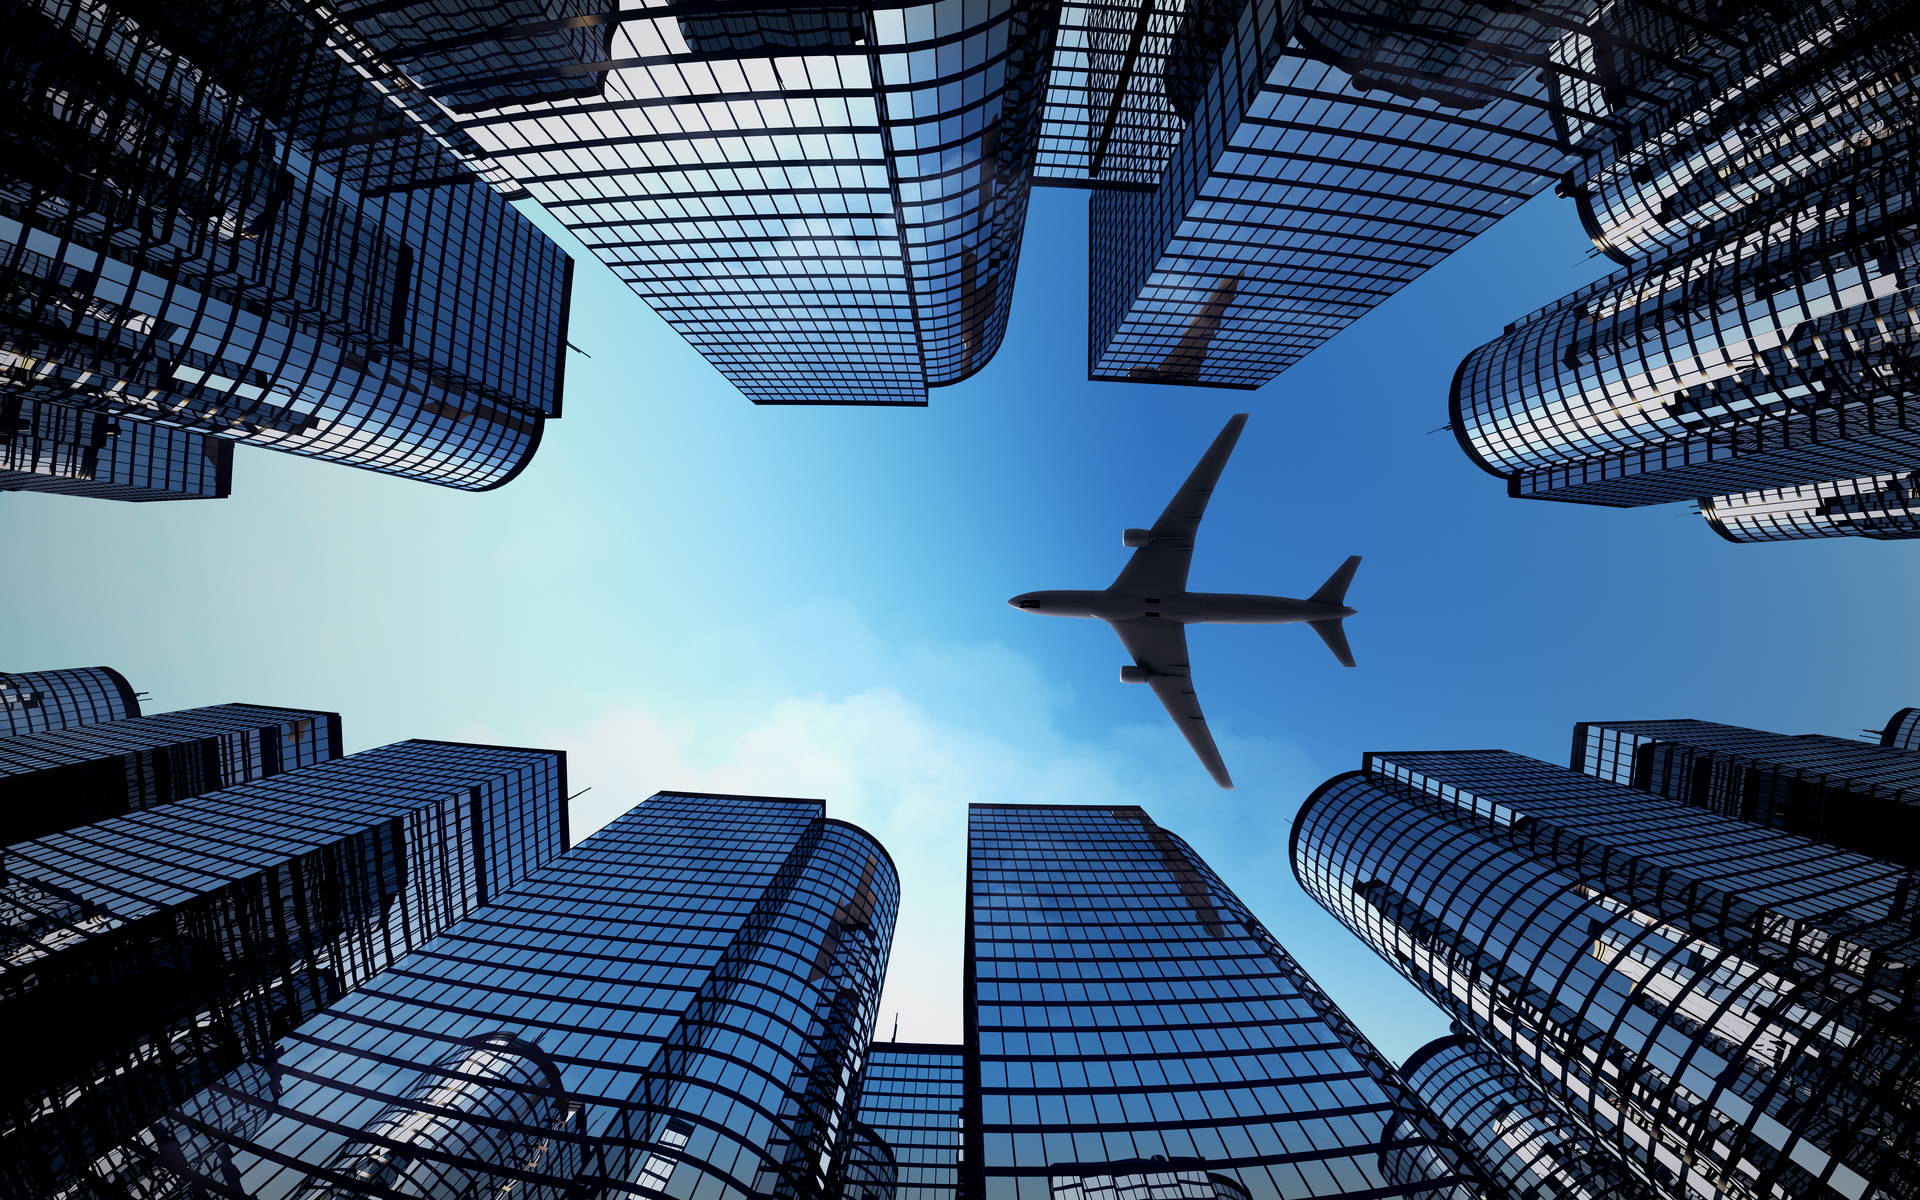 Business buildings and aircraft